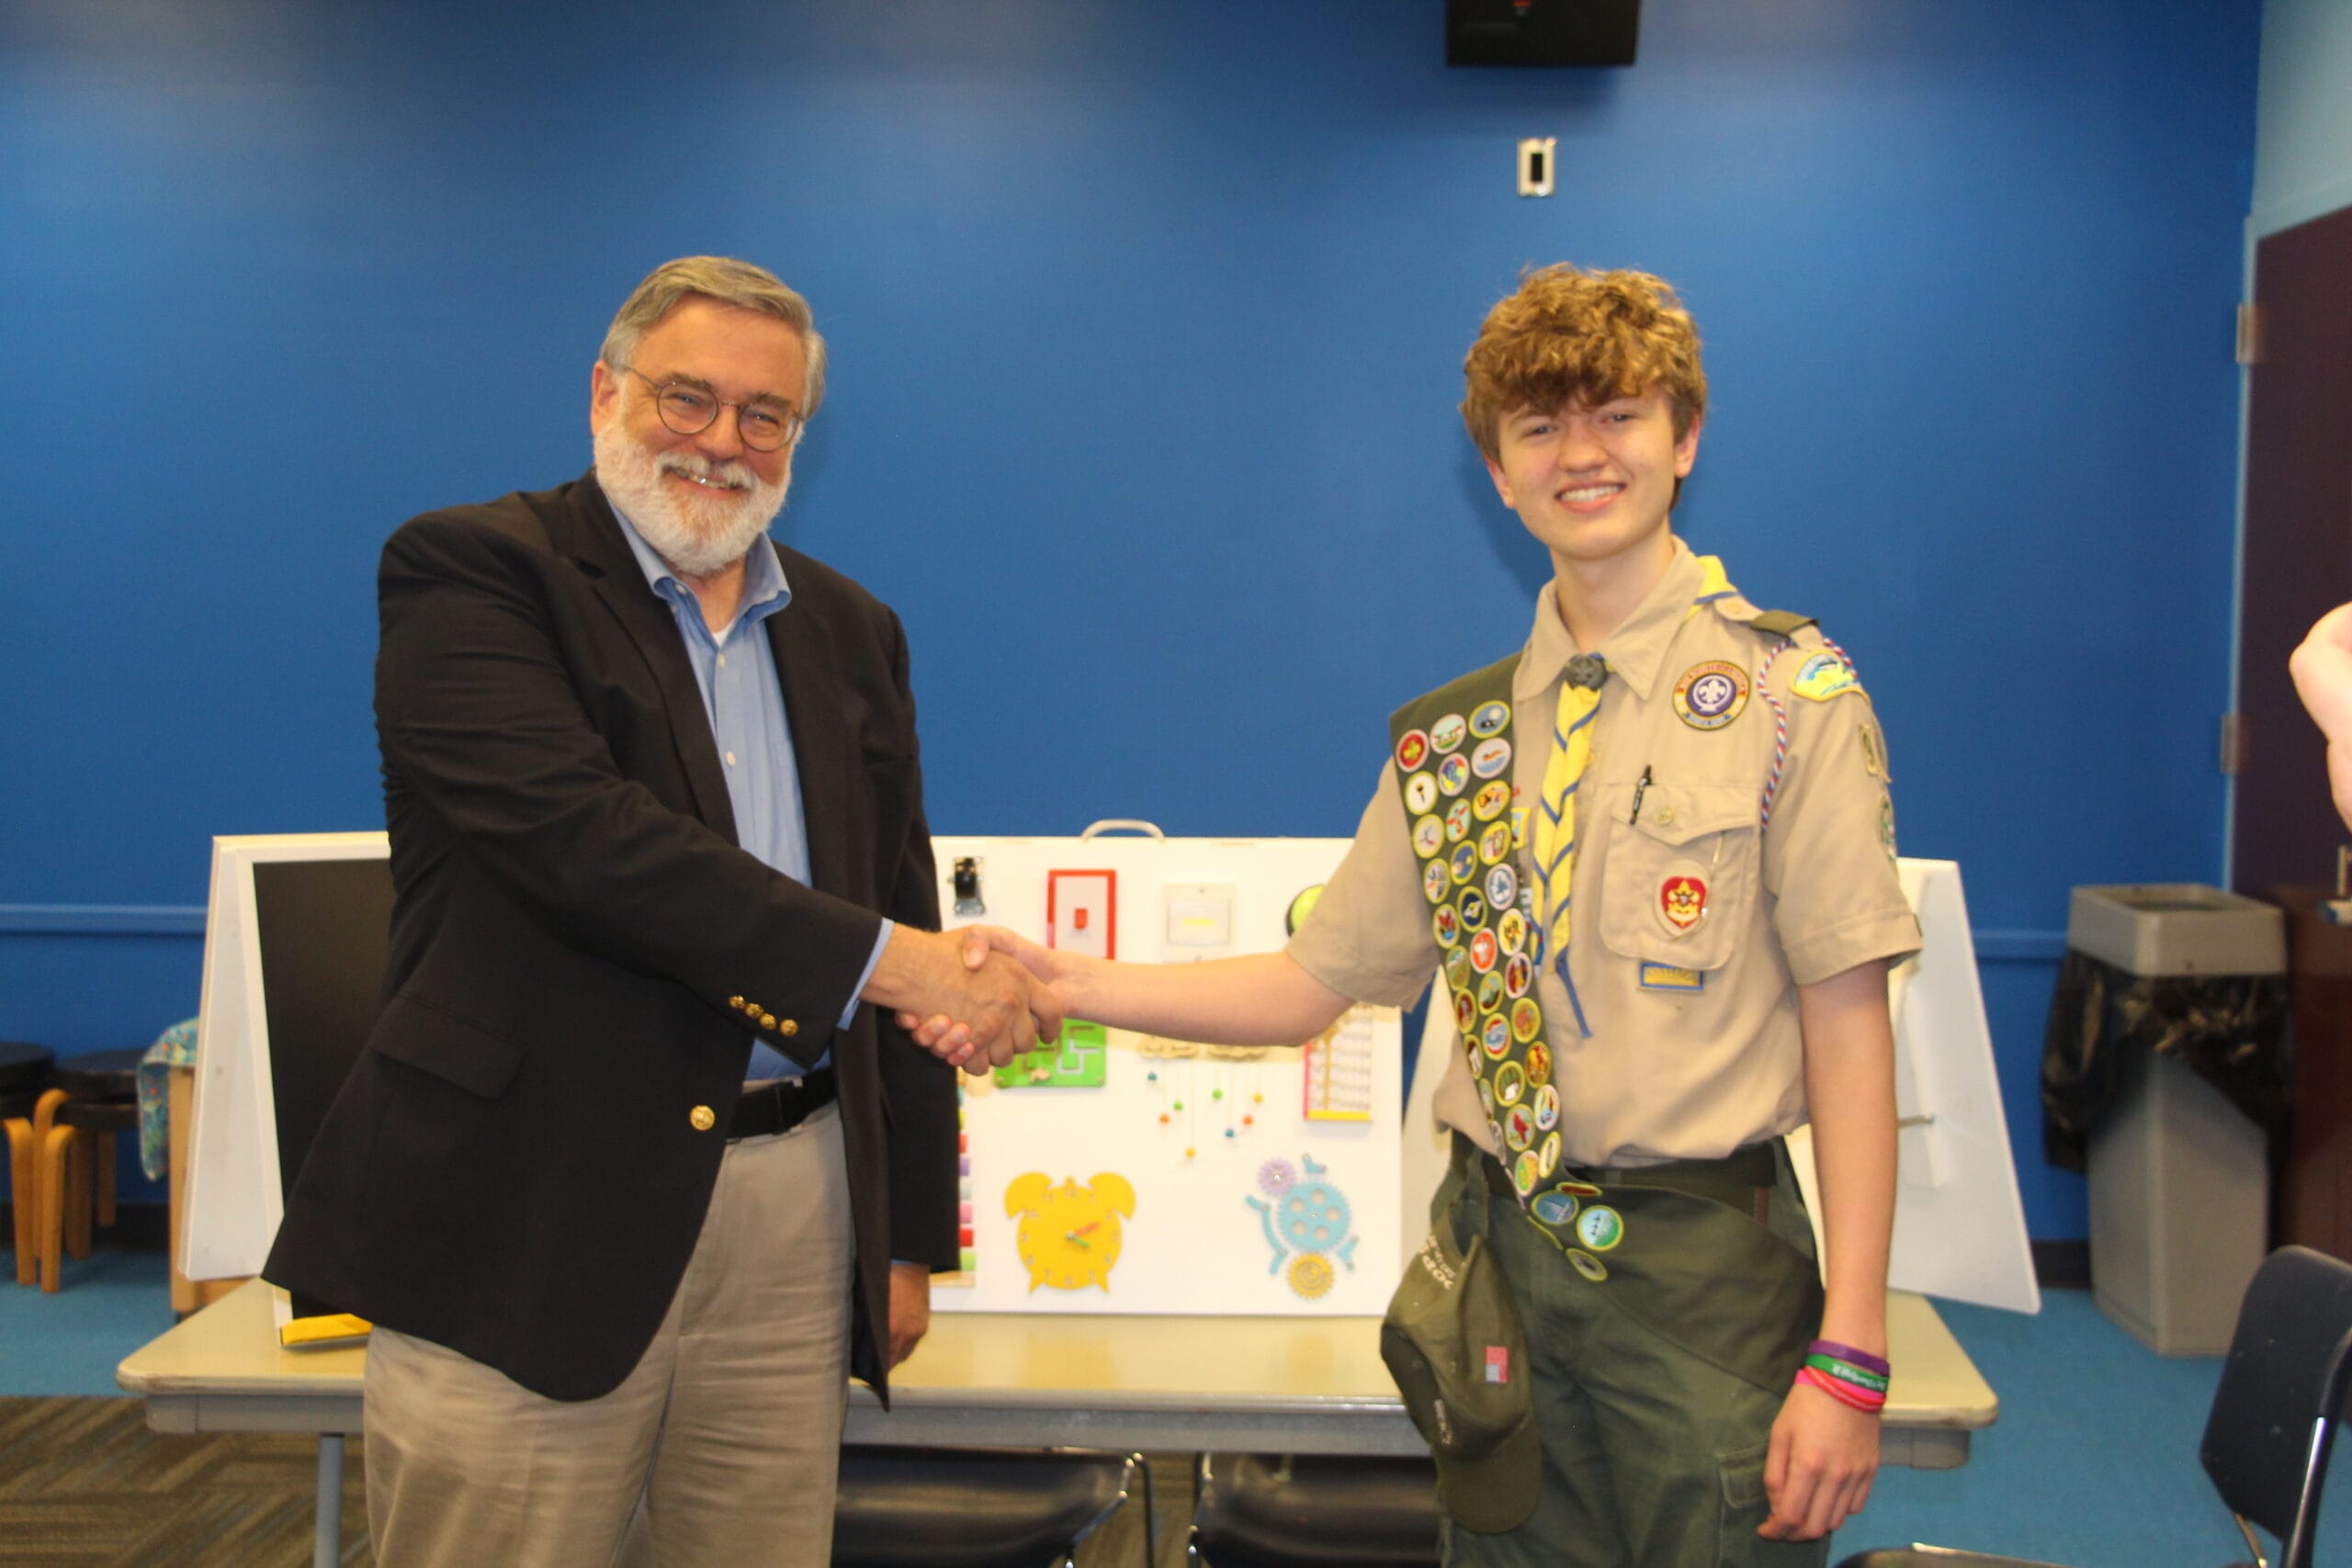 West Islip Boy Scout Troop 95 Awarded Their 60th Eagle Scout Rank